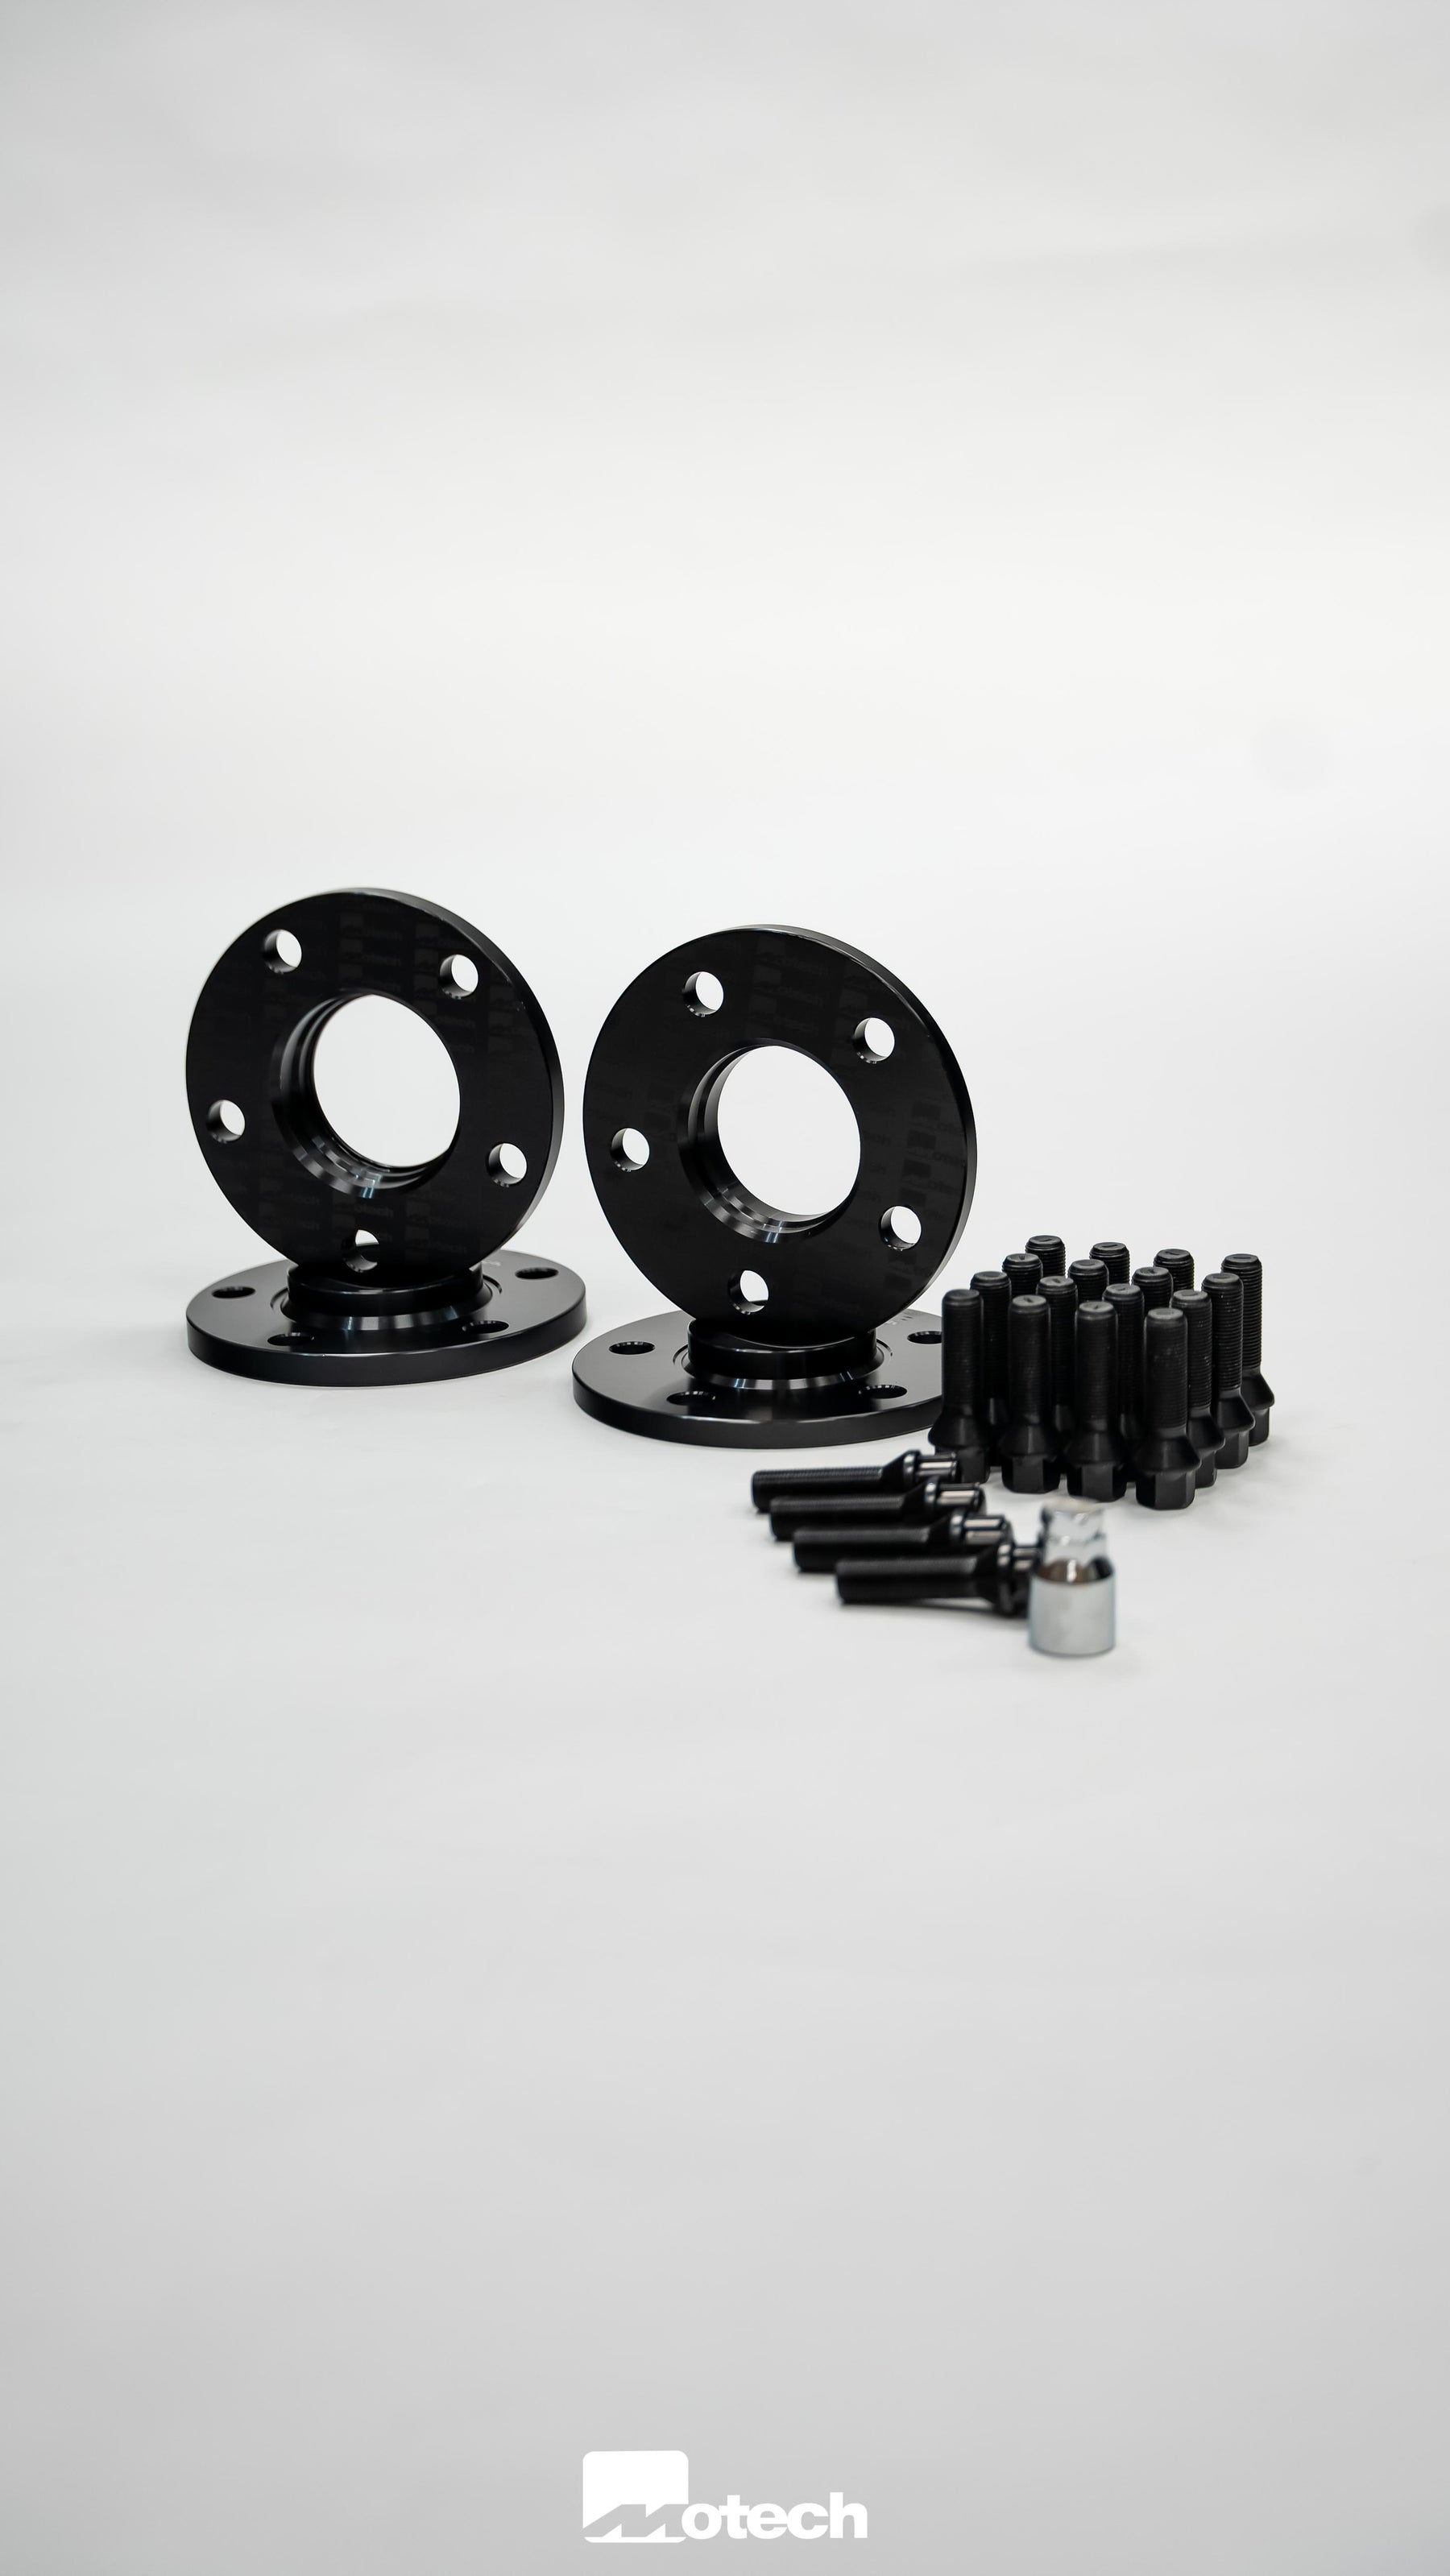 MINI F56 Wheel Spacers (Bolts and Lockers Incl.)